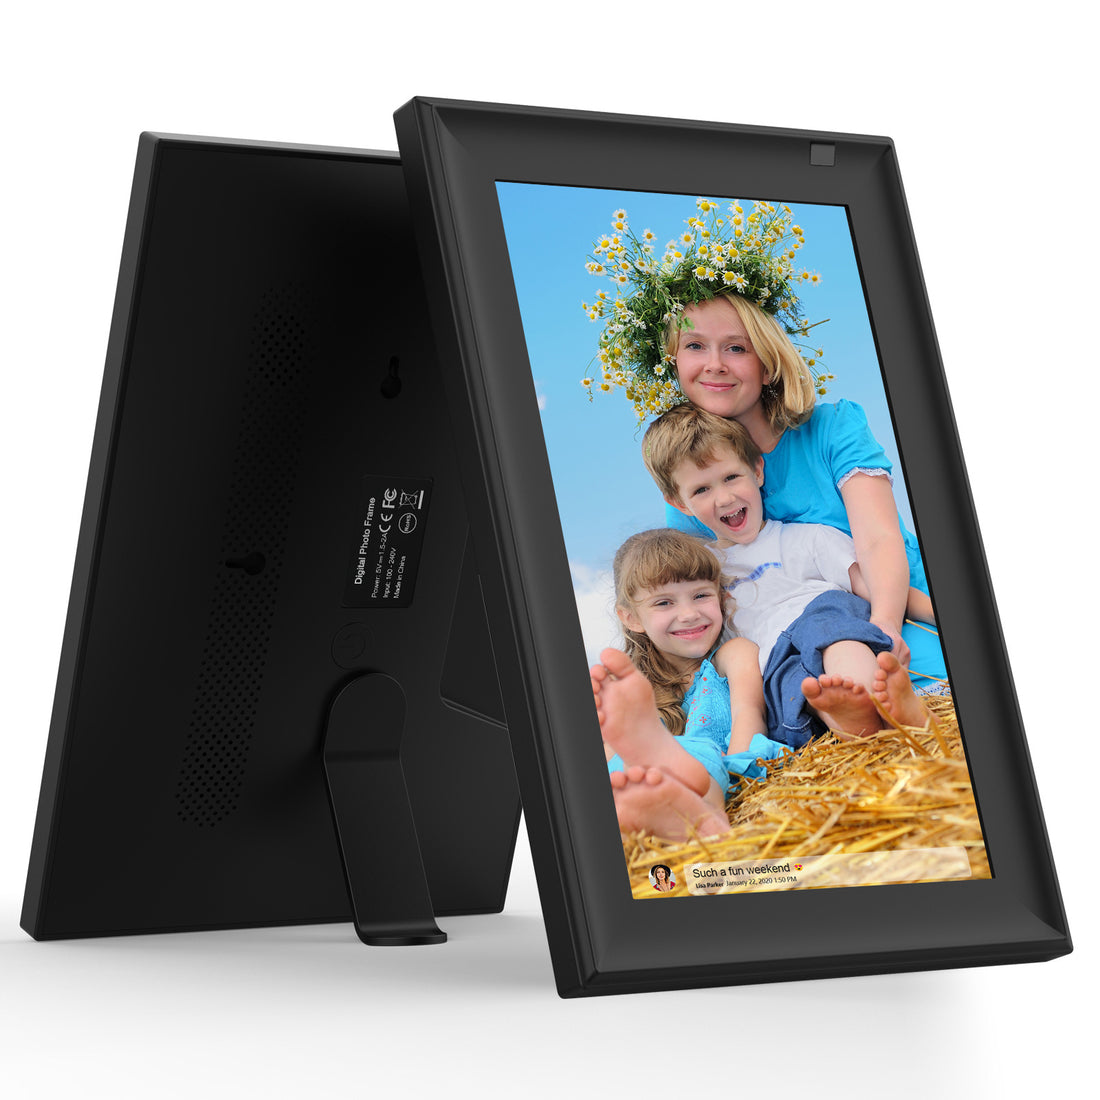 UK Technology Motion Detection Black WiFi Digital Photo Frame in portrait mode showing both the front and back